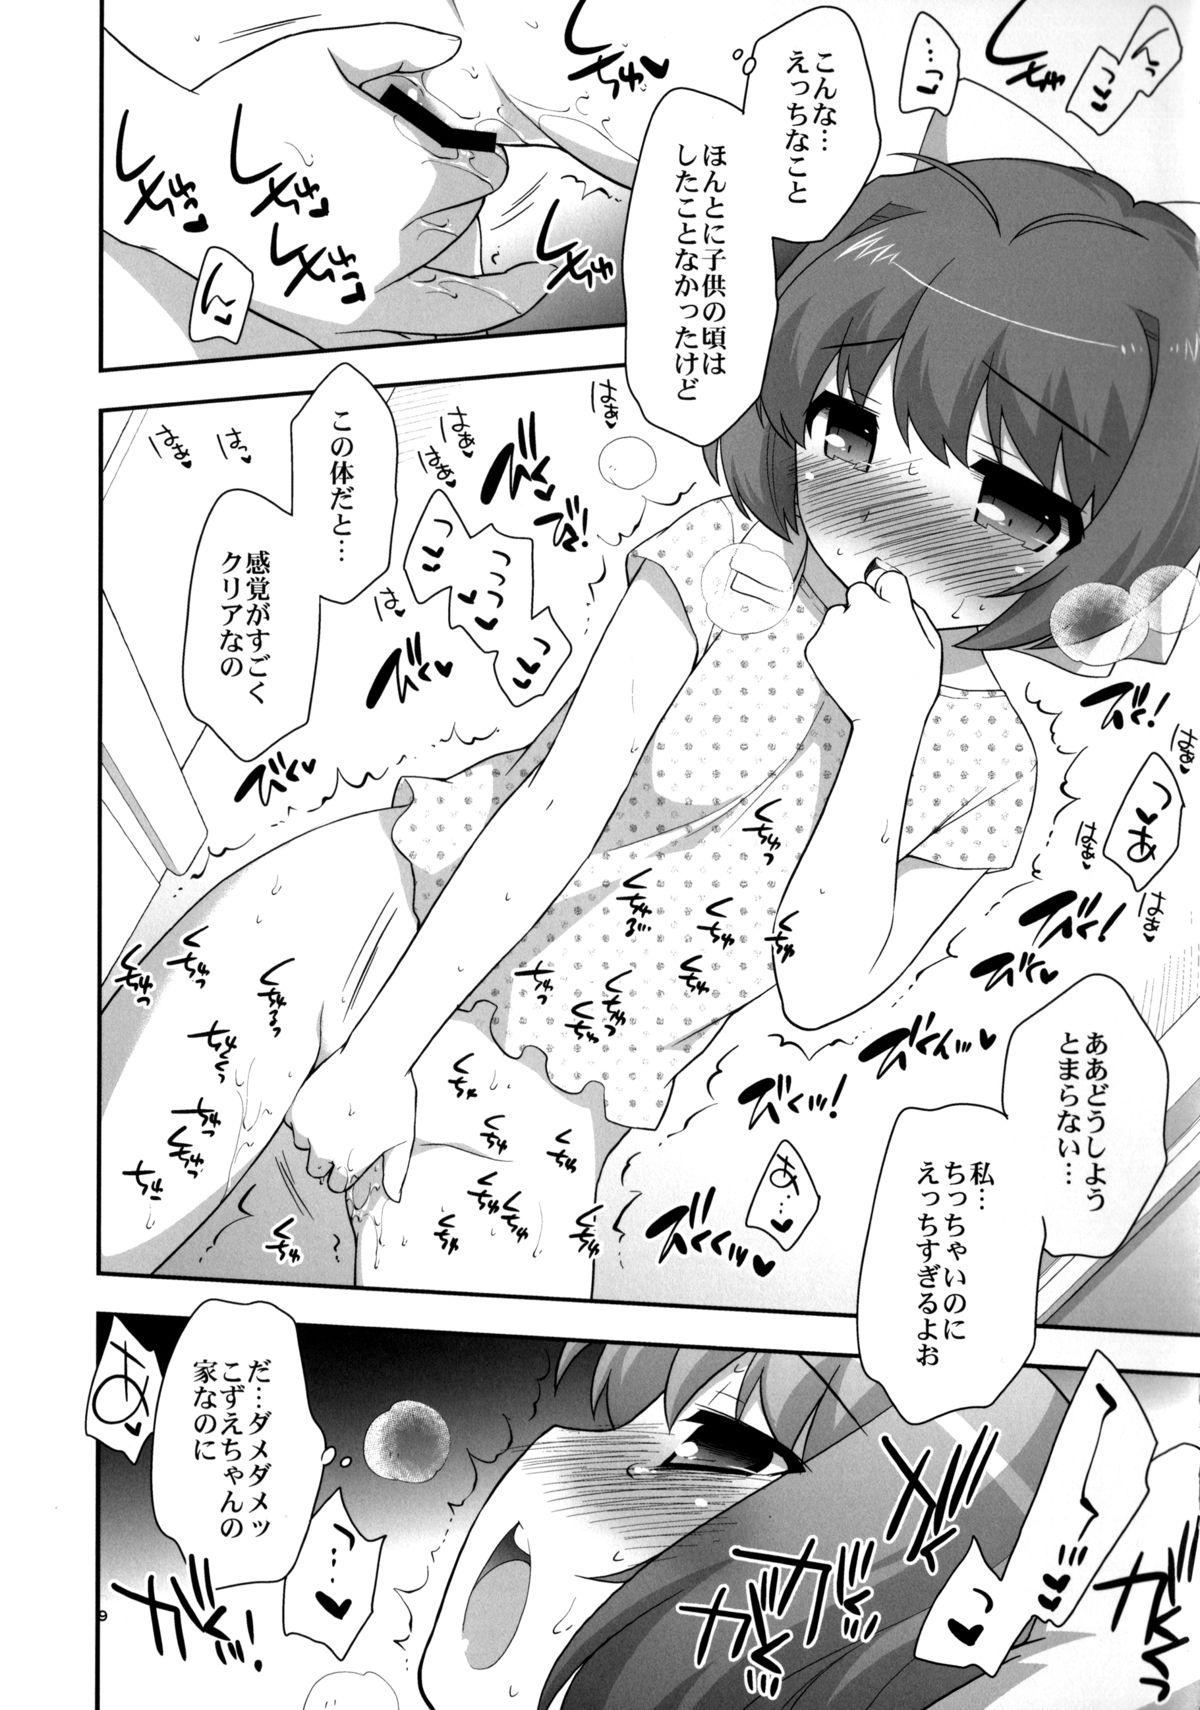 Collar Marorara - The world god only knows Gay Trimmed - Page 8